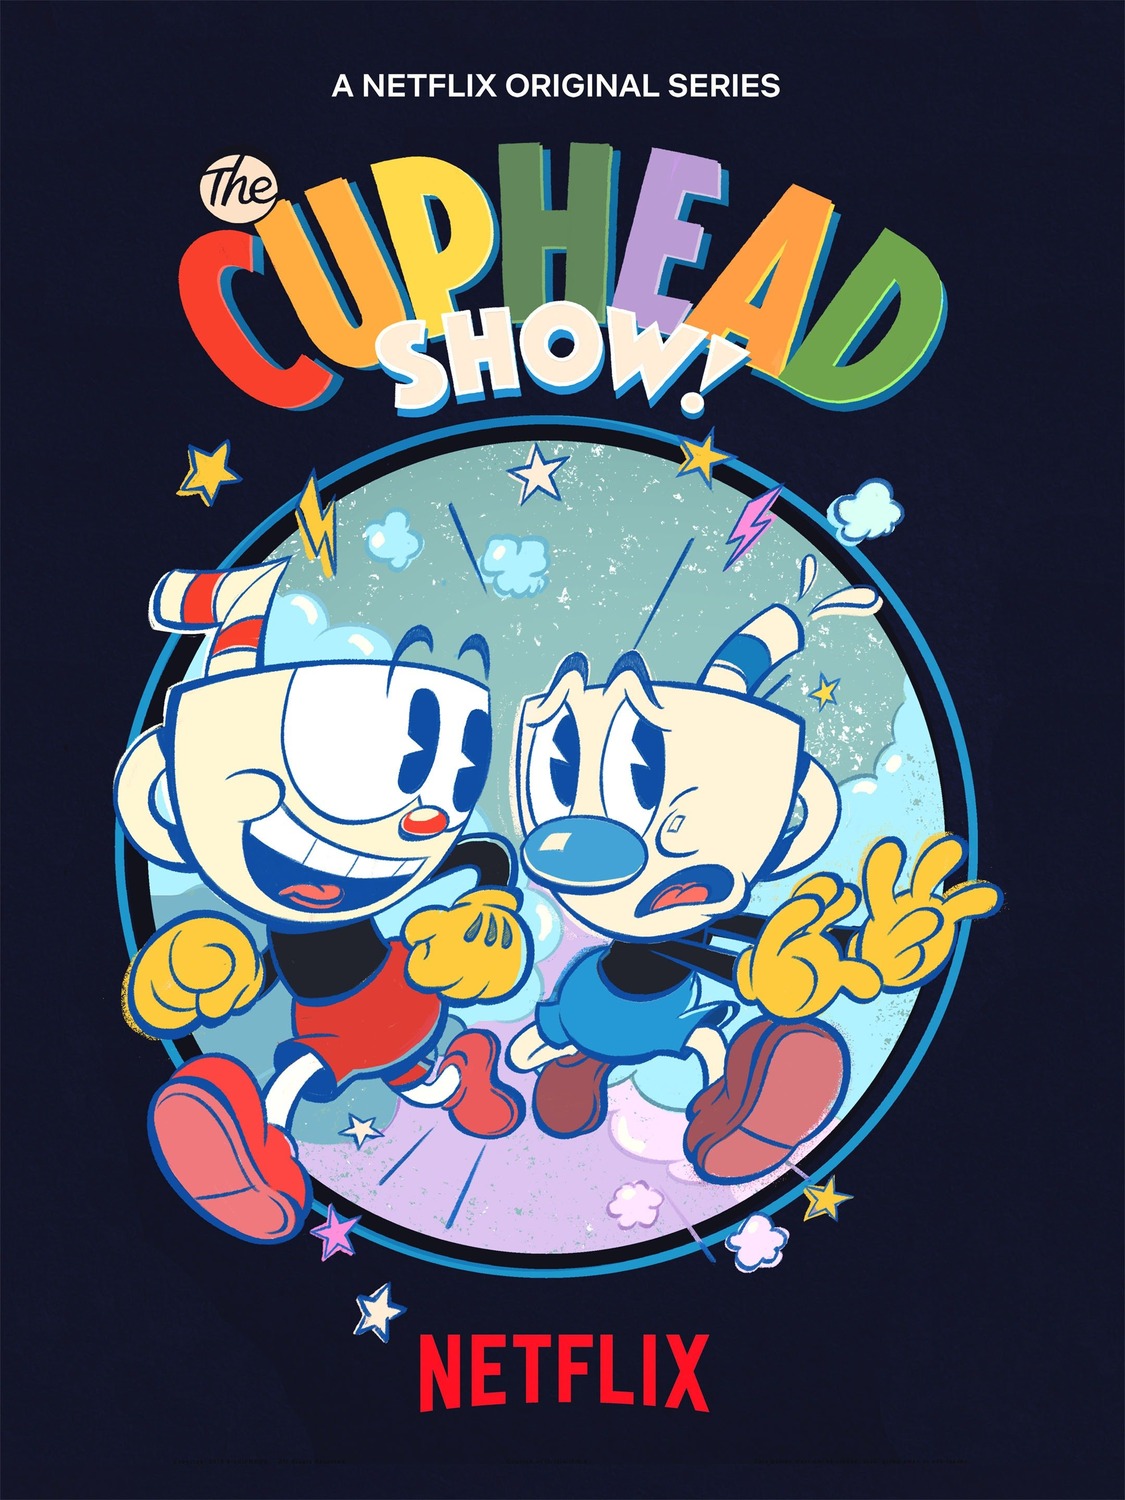 Extra Large TV Poster Image for The Cuphead Show! (#1 of 3)